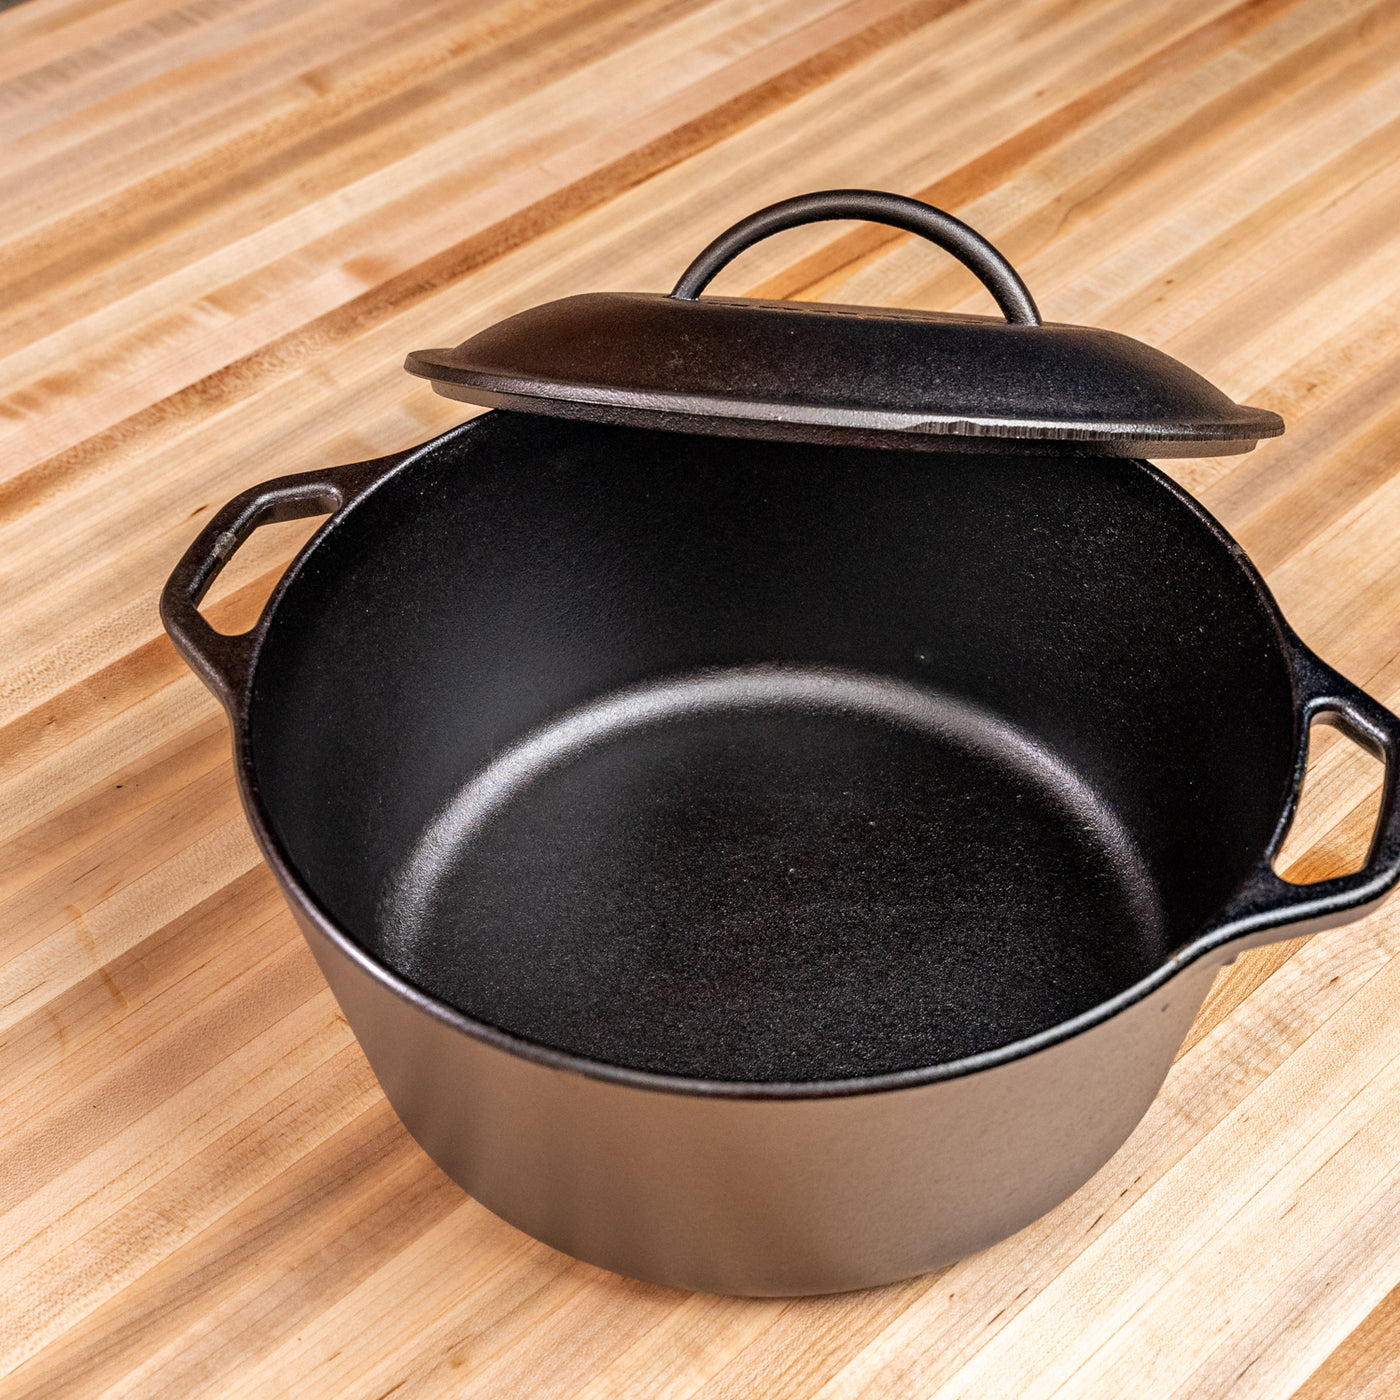 How to use a LODGE Cast Iron 3.2 QT Combo Cooker as a DUTCH